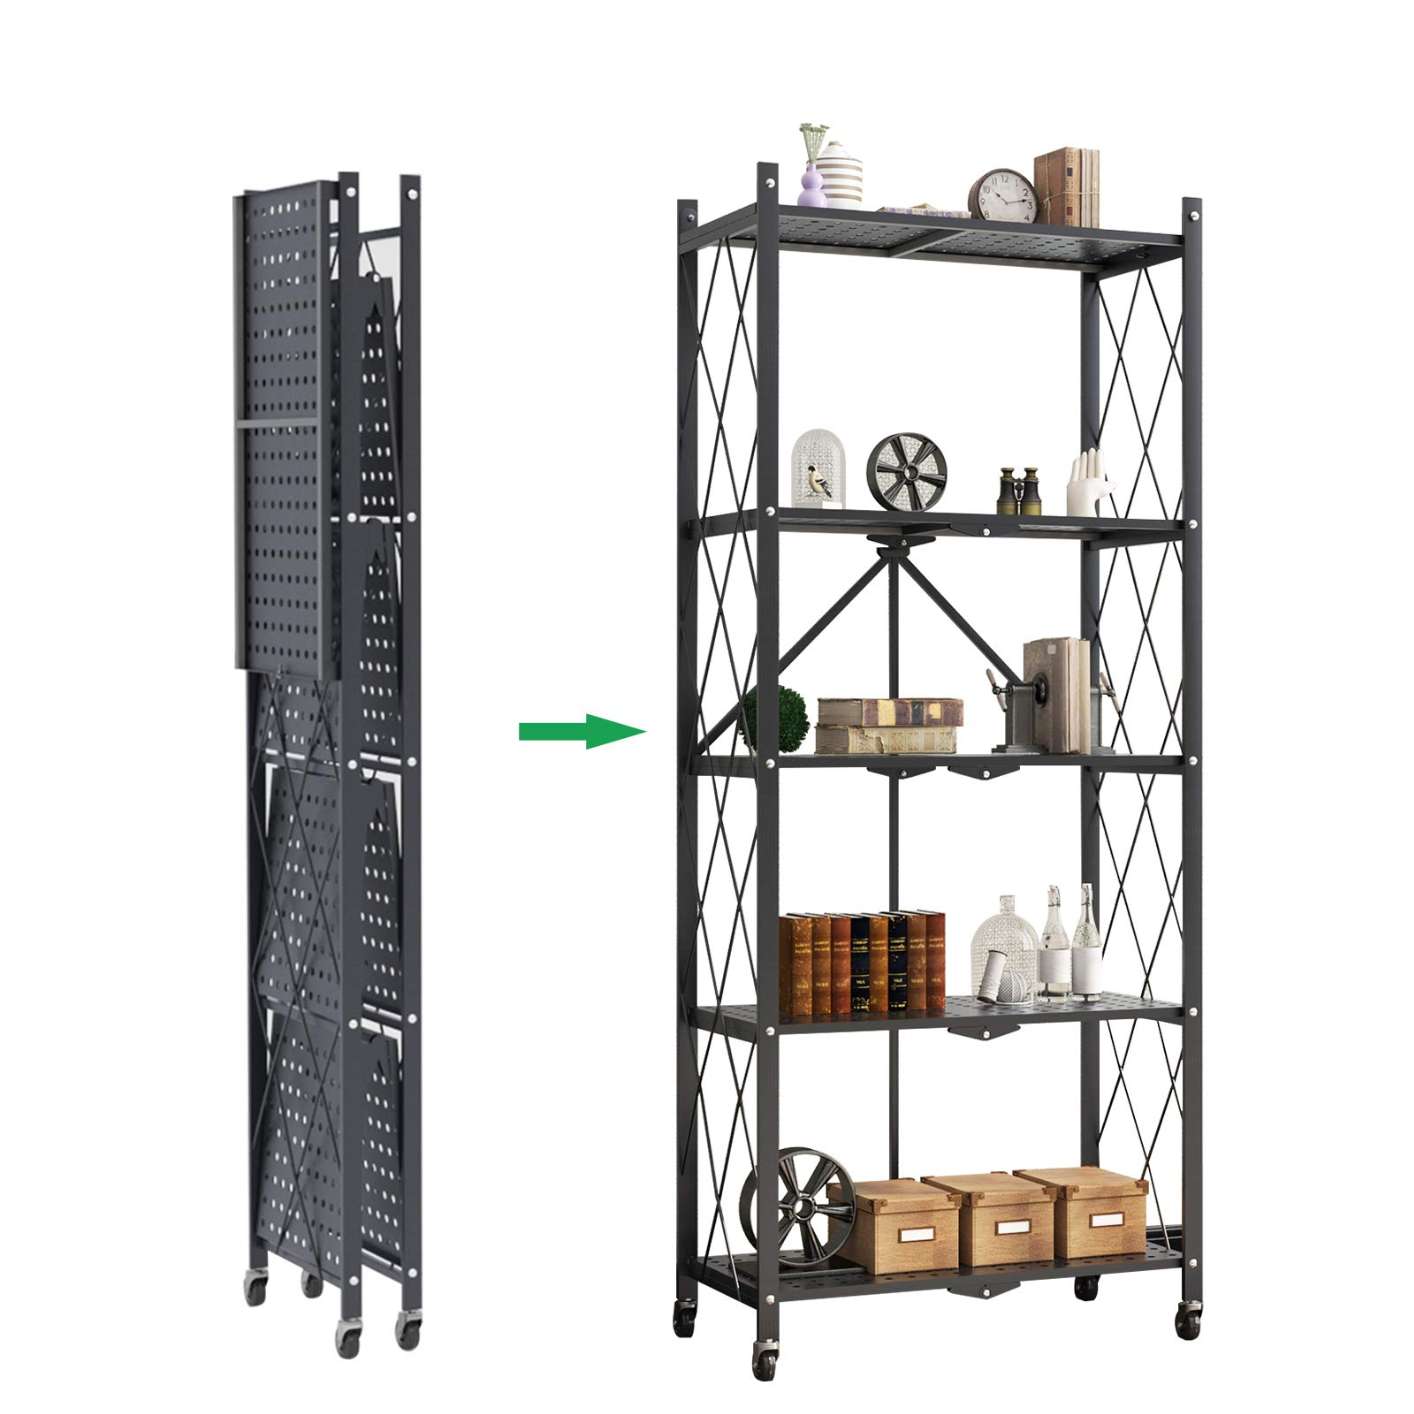 MECOLA Foldable Metal Storage Shelves with Wheels , Heavy-Duty Black Wire Rack Folding Storage Rack No Assembly, for Garage Kitchen Pantry Bedroom